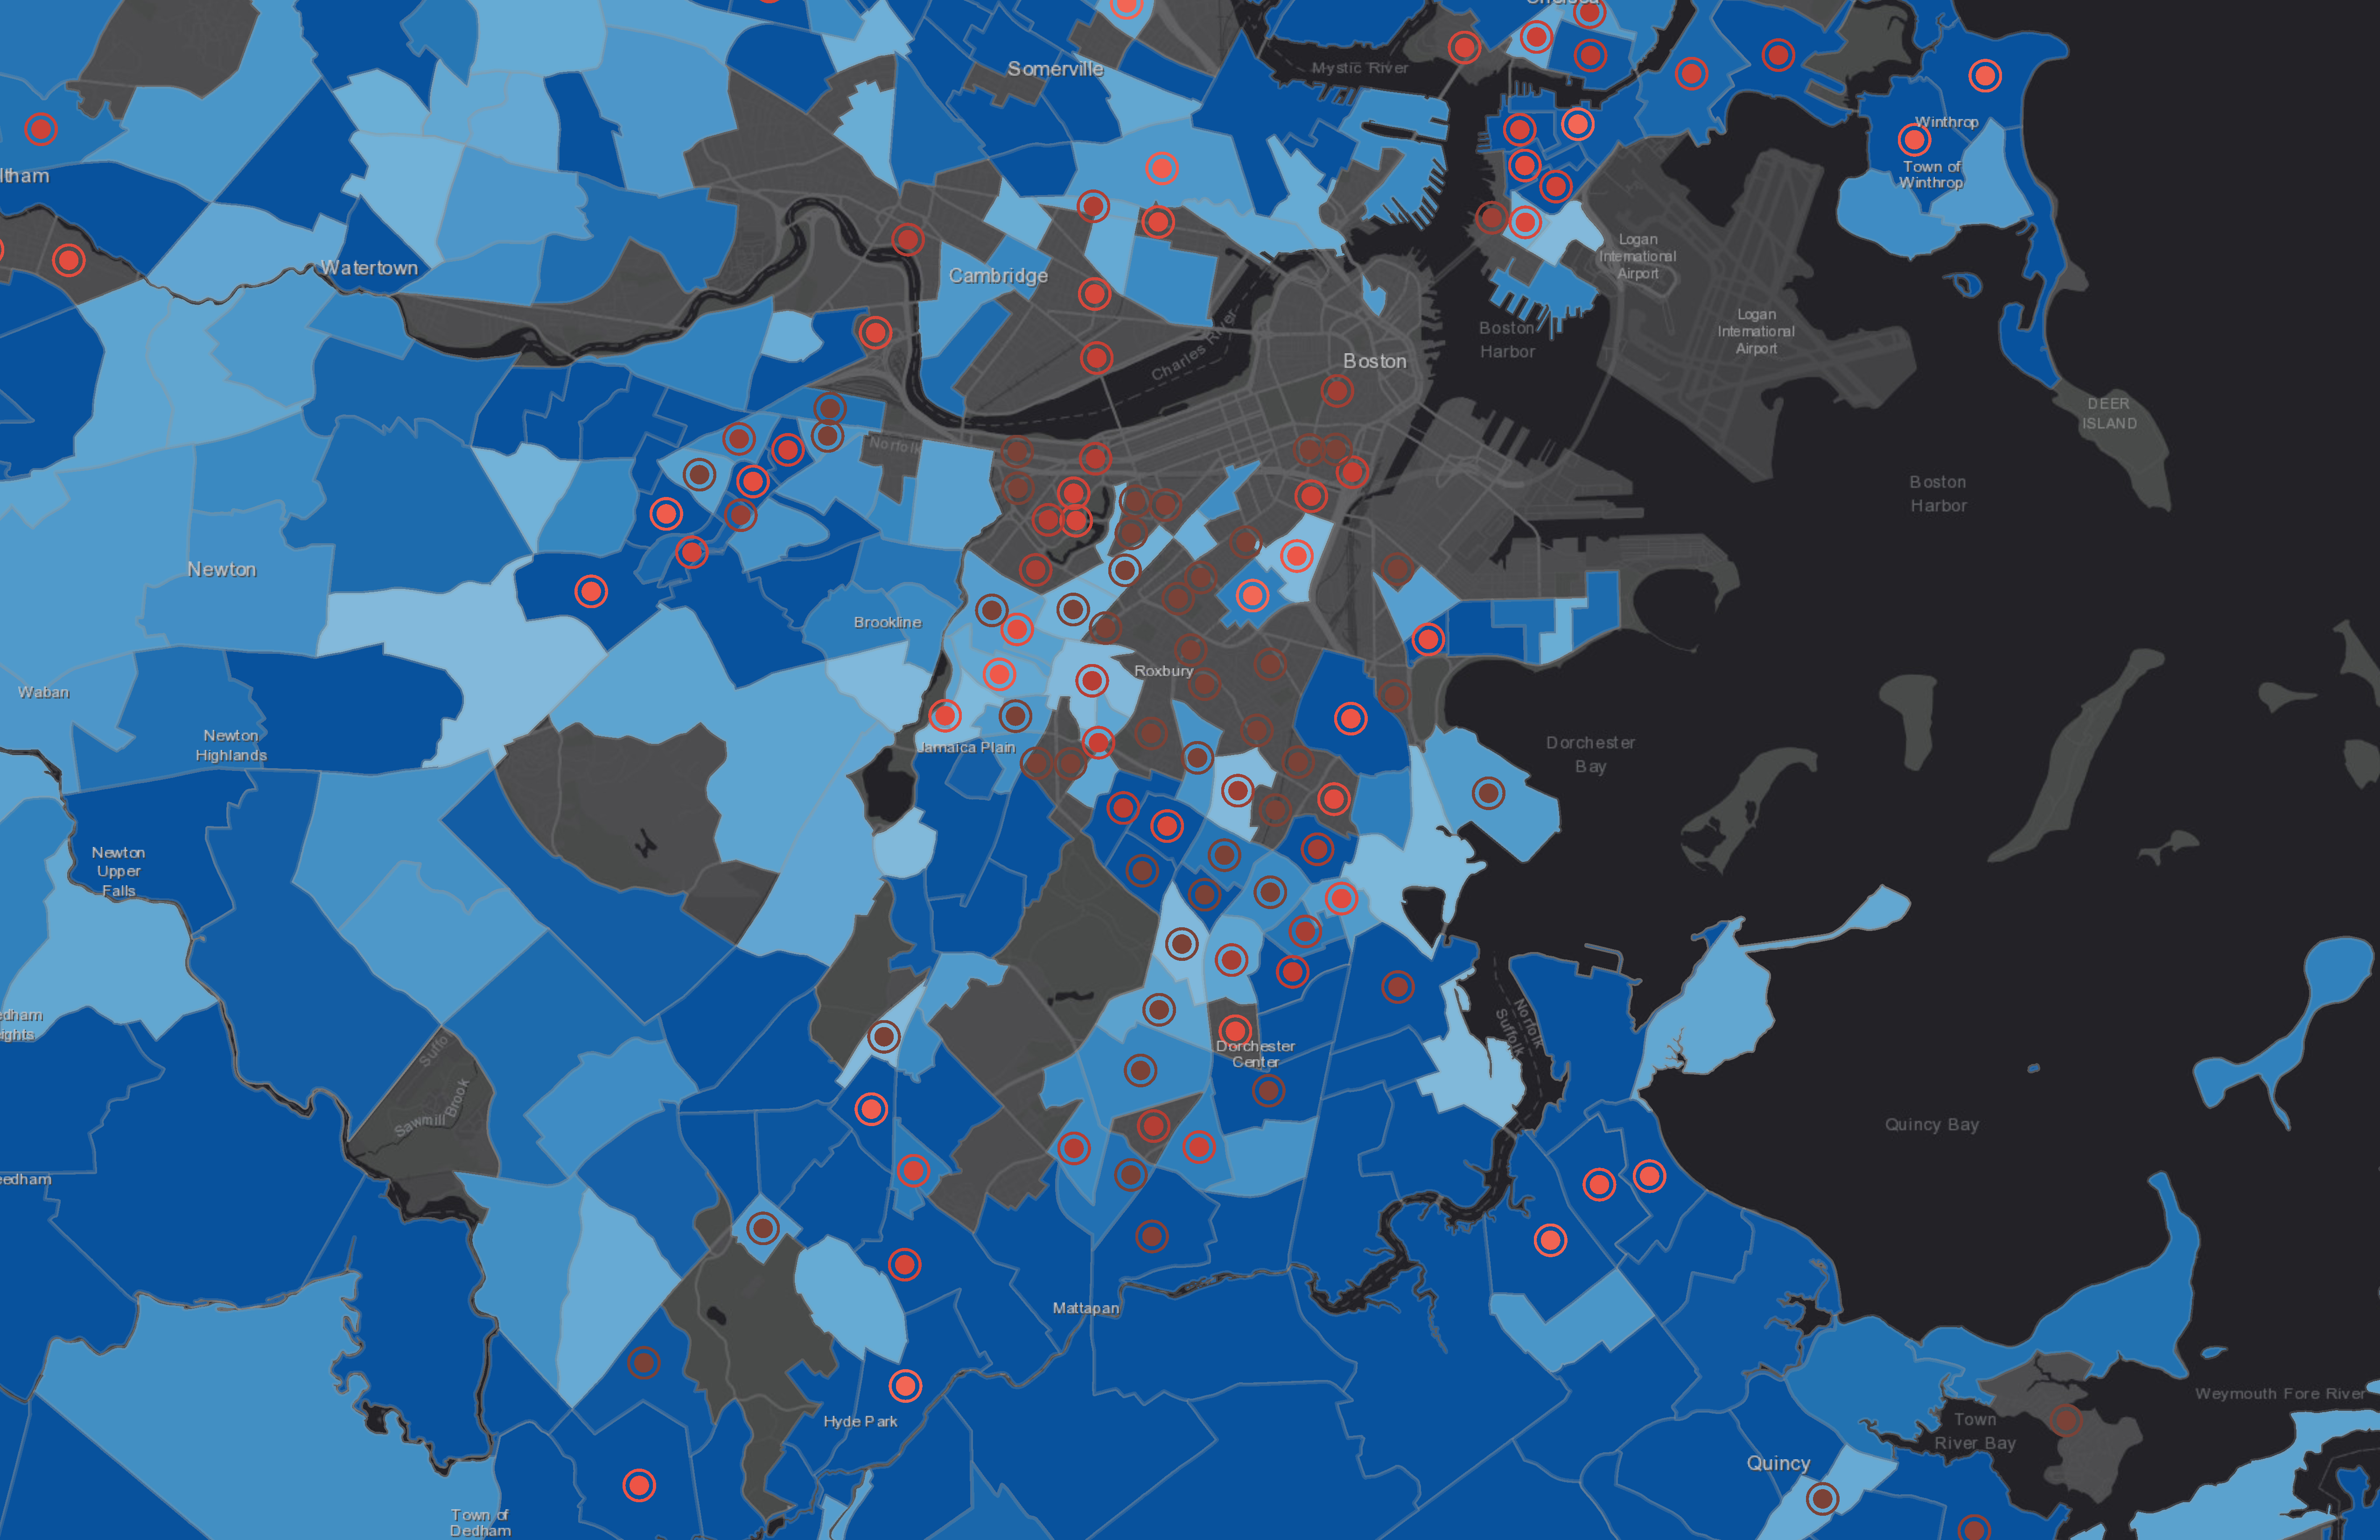 A modern map by Boston Latin School student Gideon Neave considers commute time (blue) and household income (red), and shows that people with less income are often subject to longer commute times.